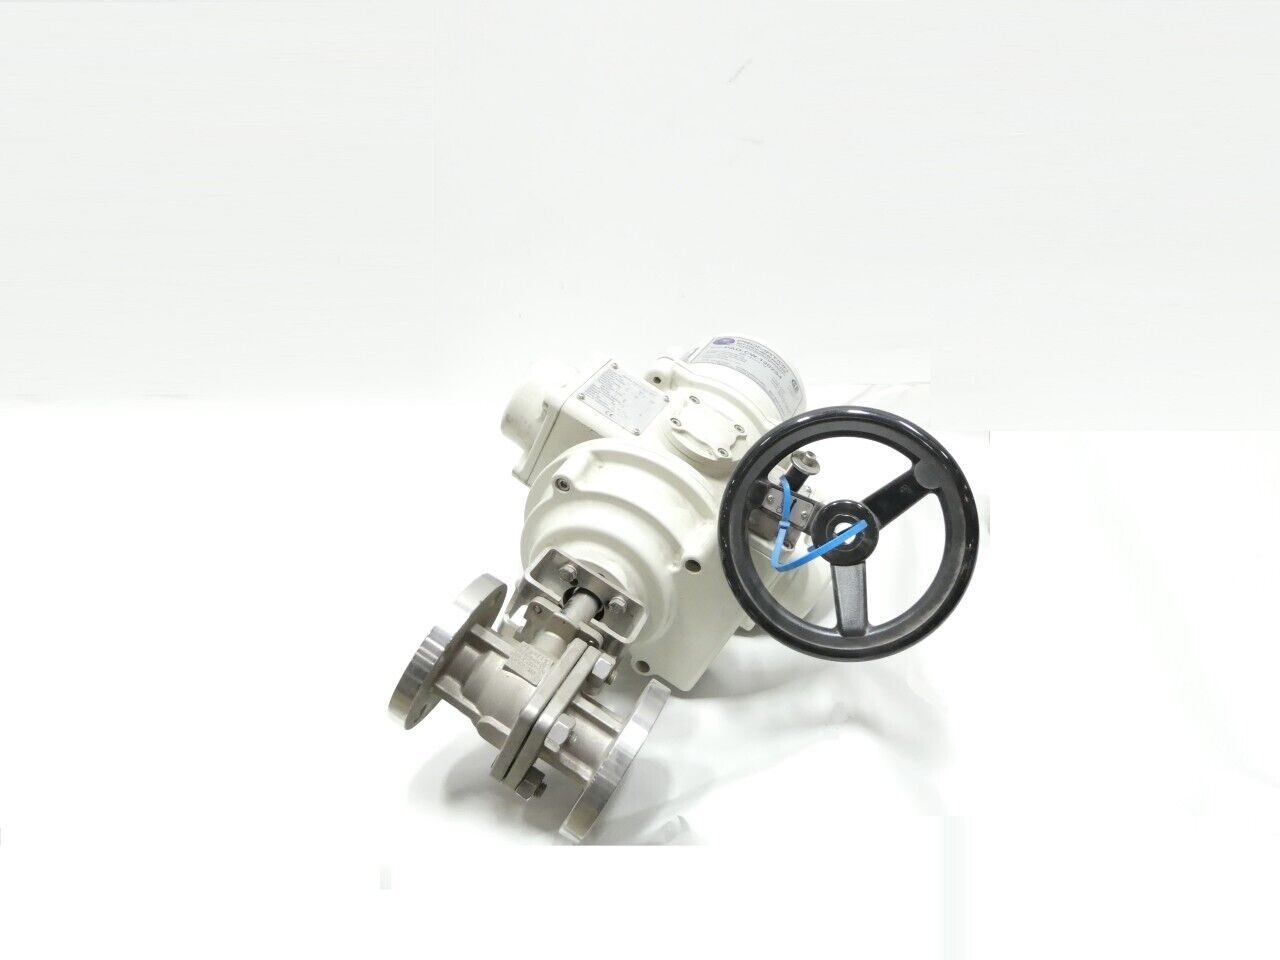 Flo-tite F150 Promation Pao-cw-1202s4 Stainless Ball Valve 120v-ac 1-1/2in 150